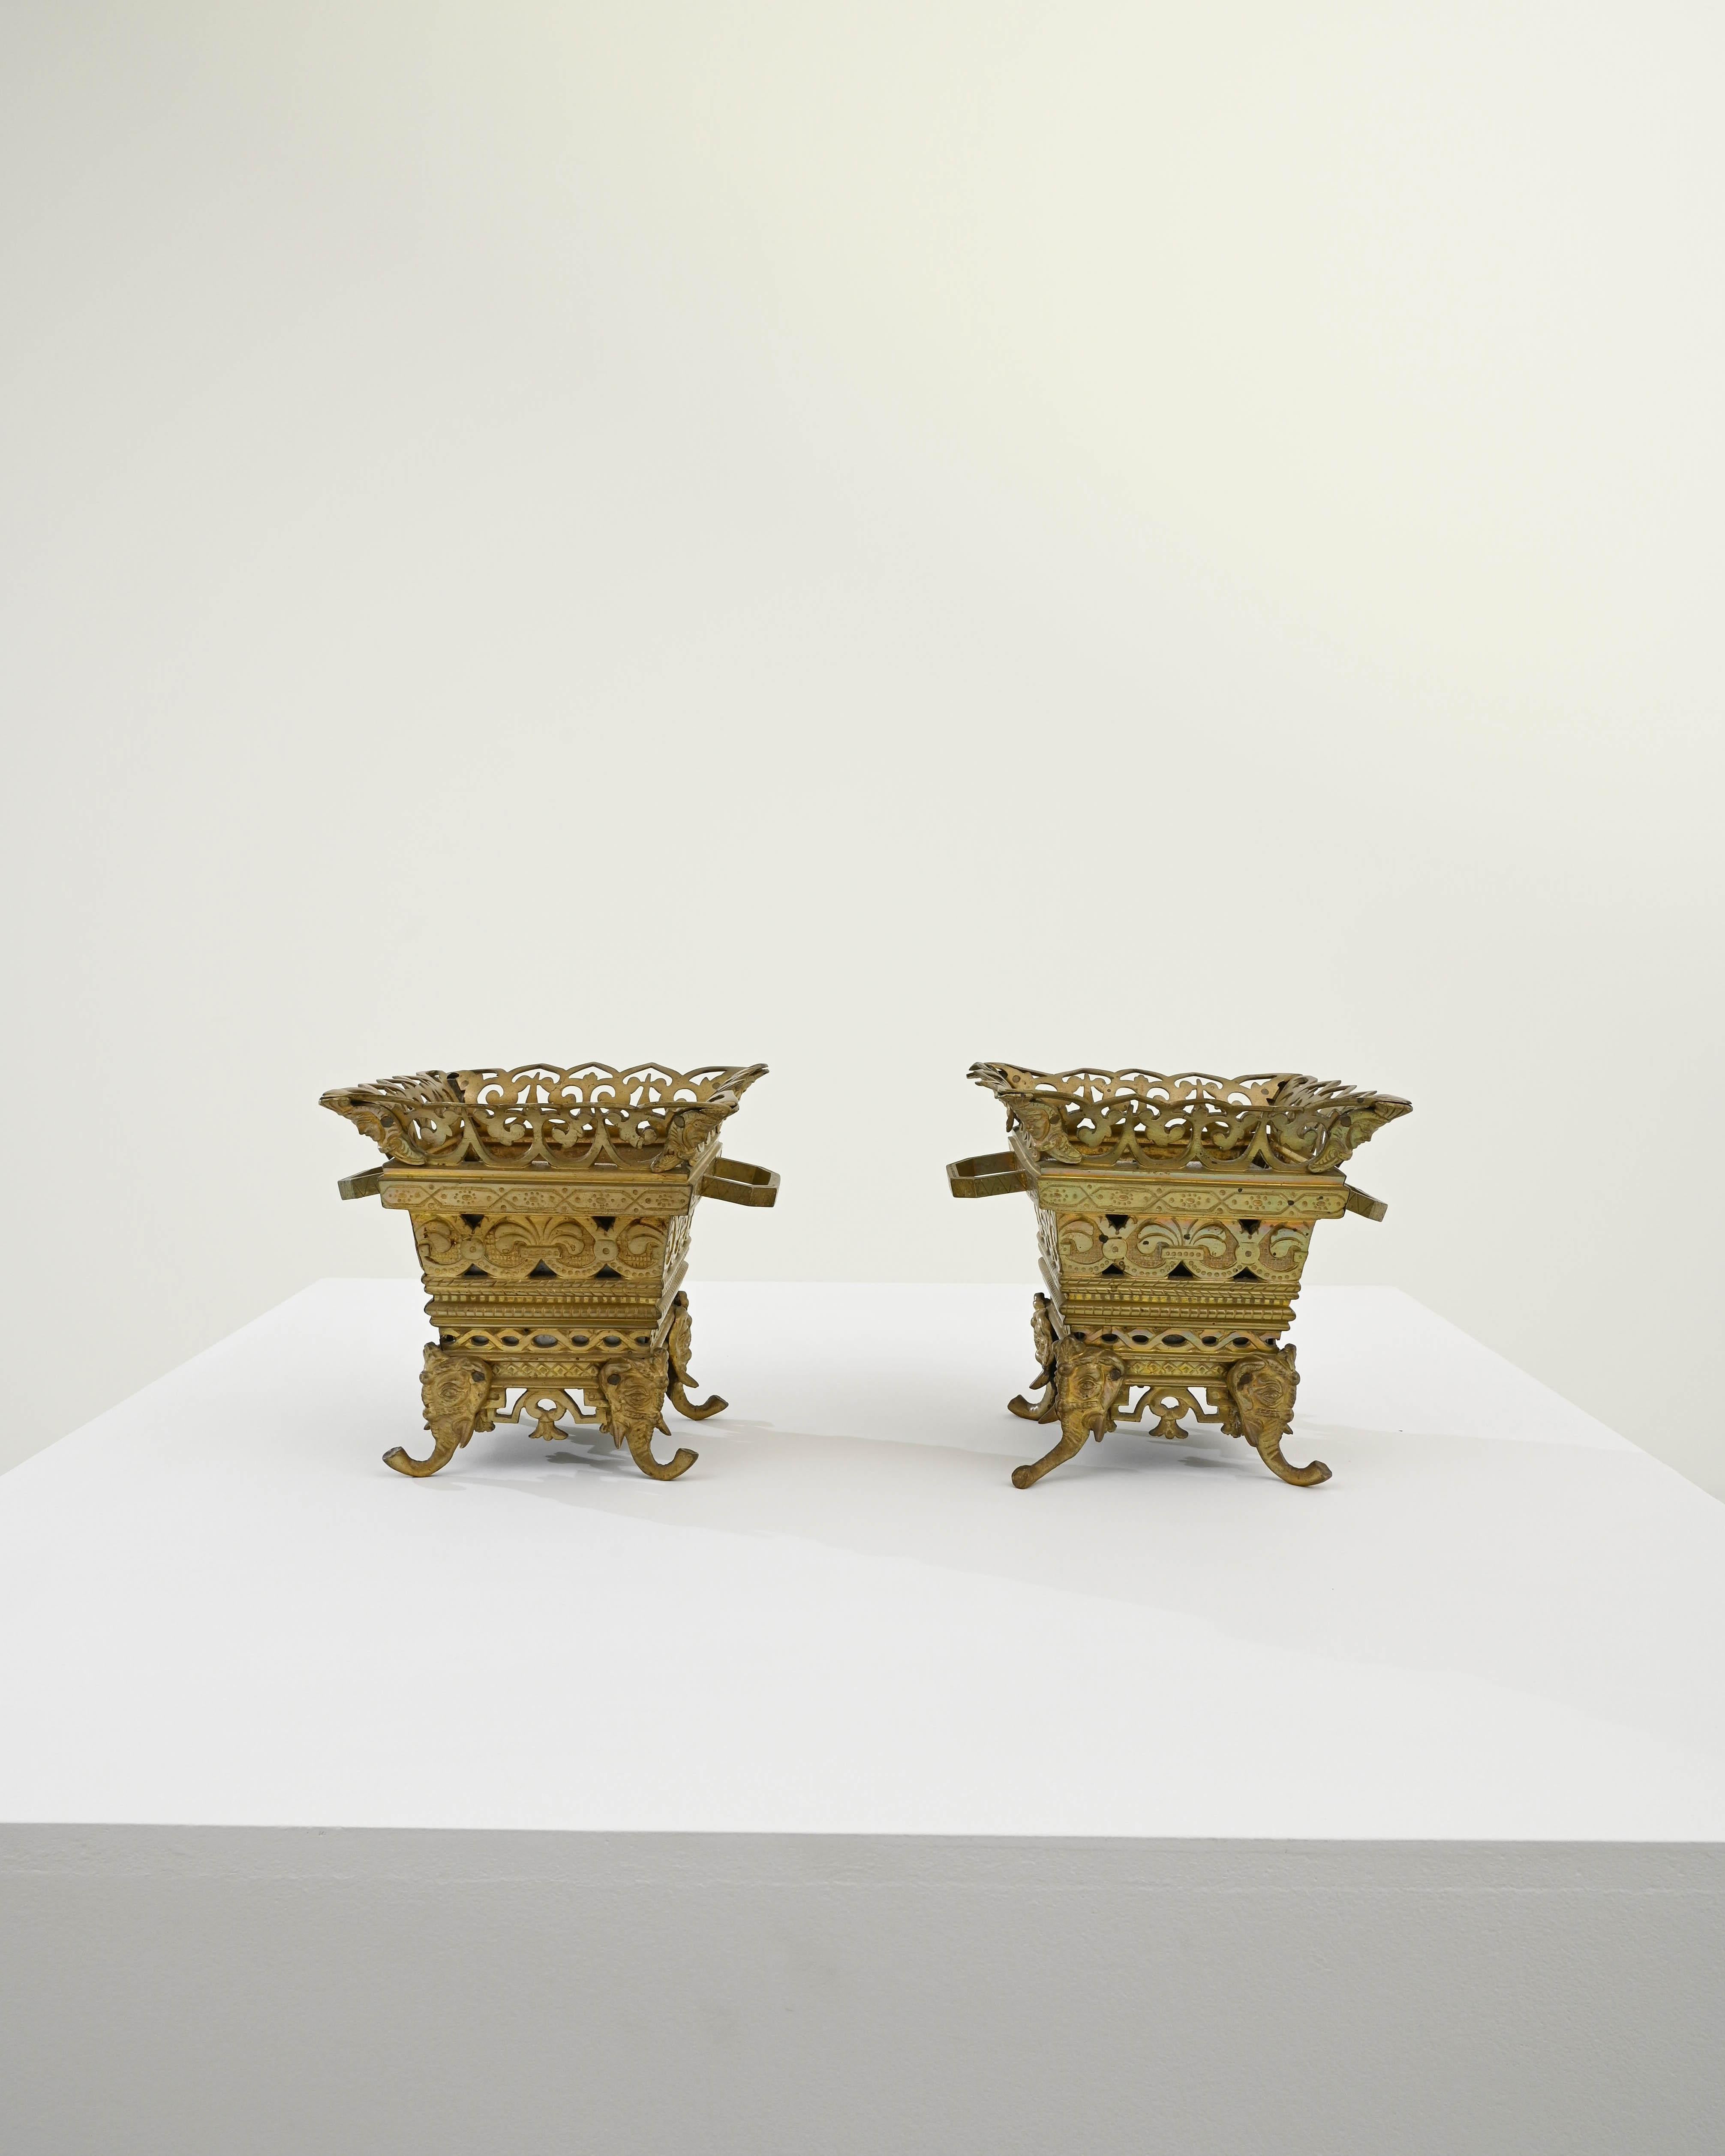 A pair of early 20th century French metal planters. Created in an illustrious Belle Époque sensibility, these identical brass planters dazzle the eye with a barrage of painstakingly shaped details. Geometric patterns, scroll motifs, and lovely